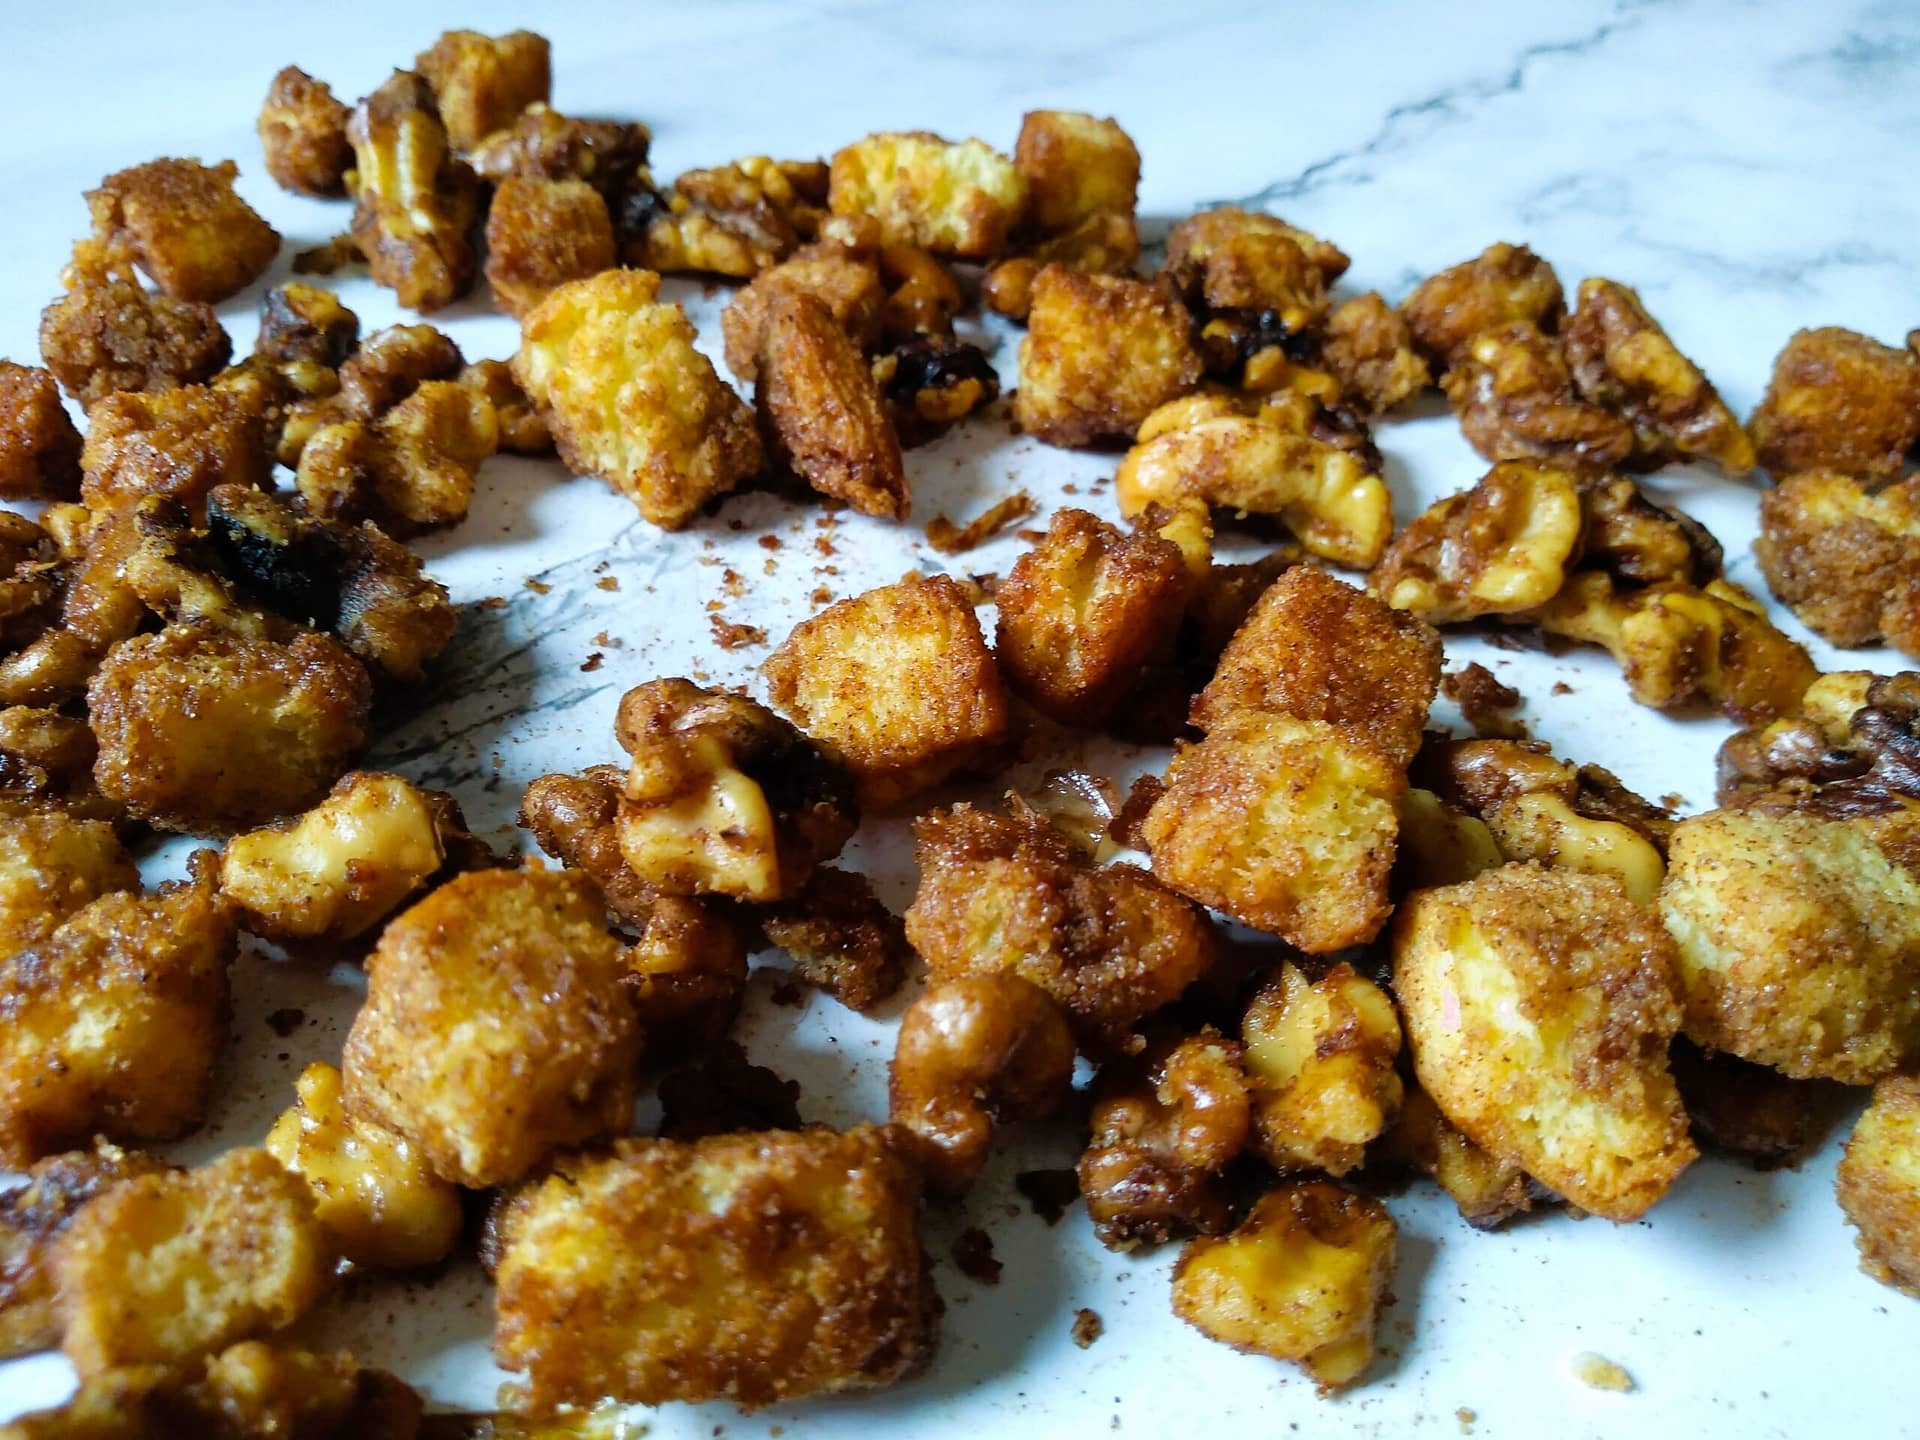 cinnamon toasted walnuts and brioche croutons